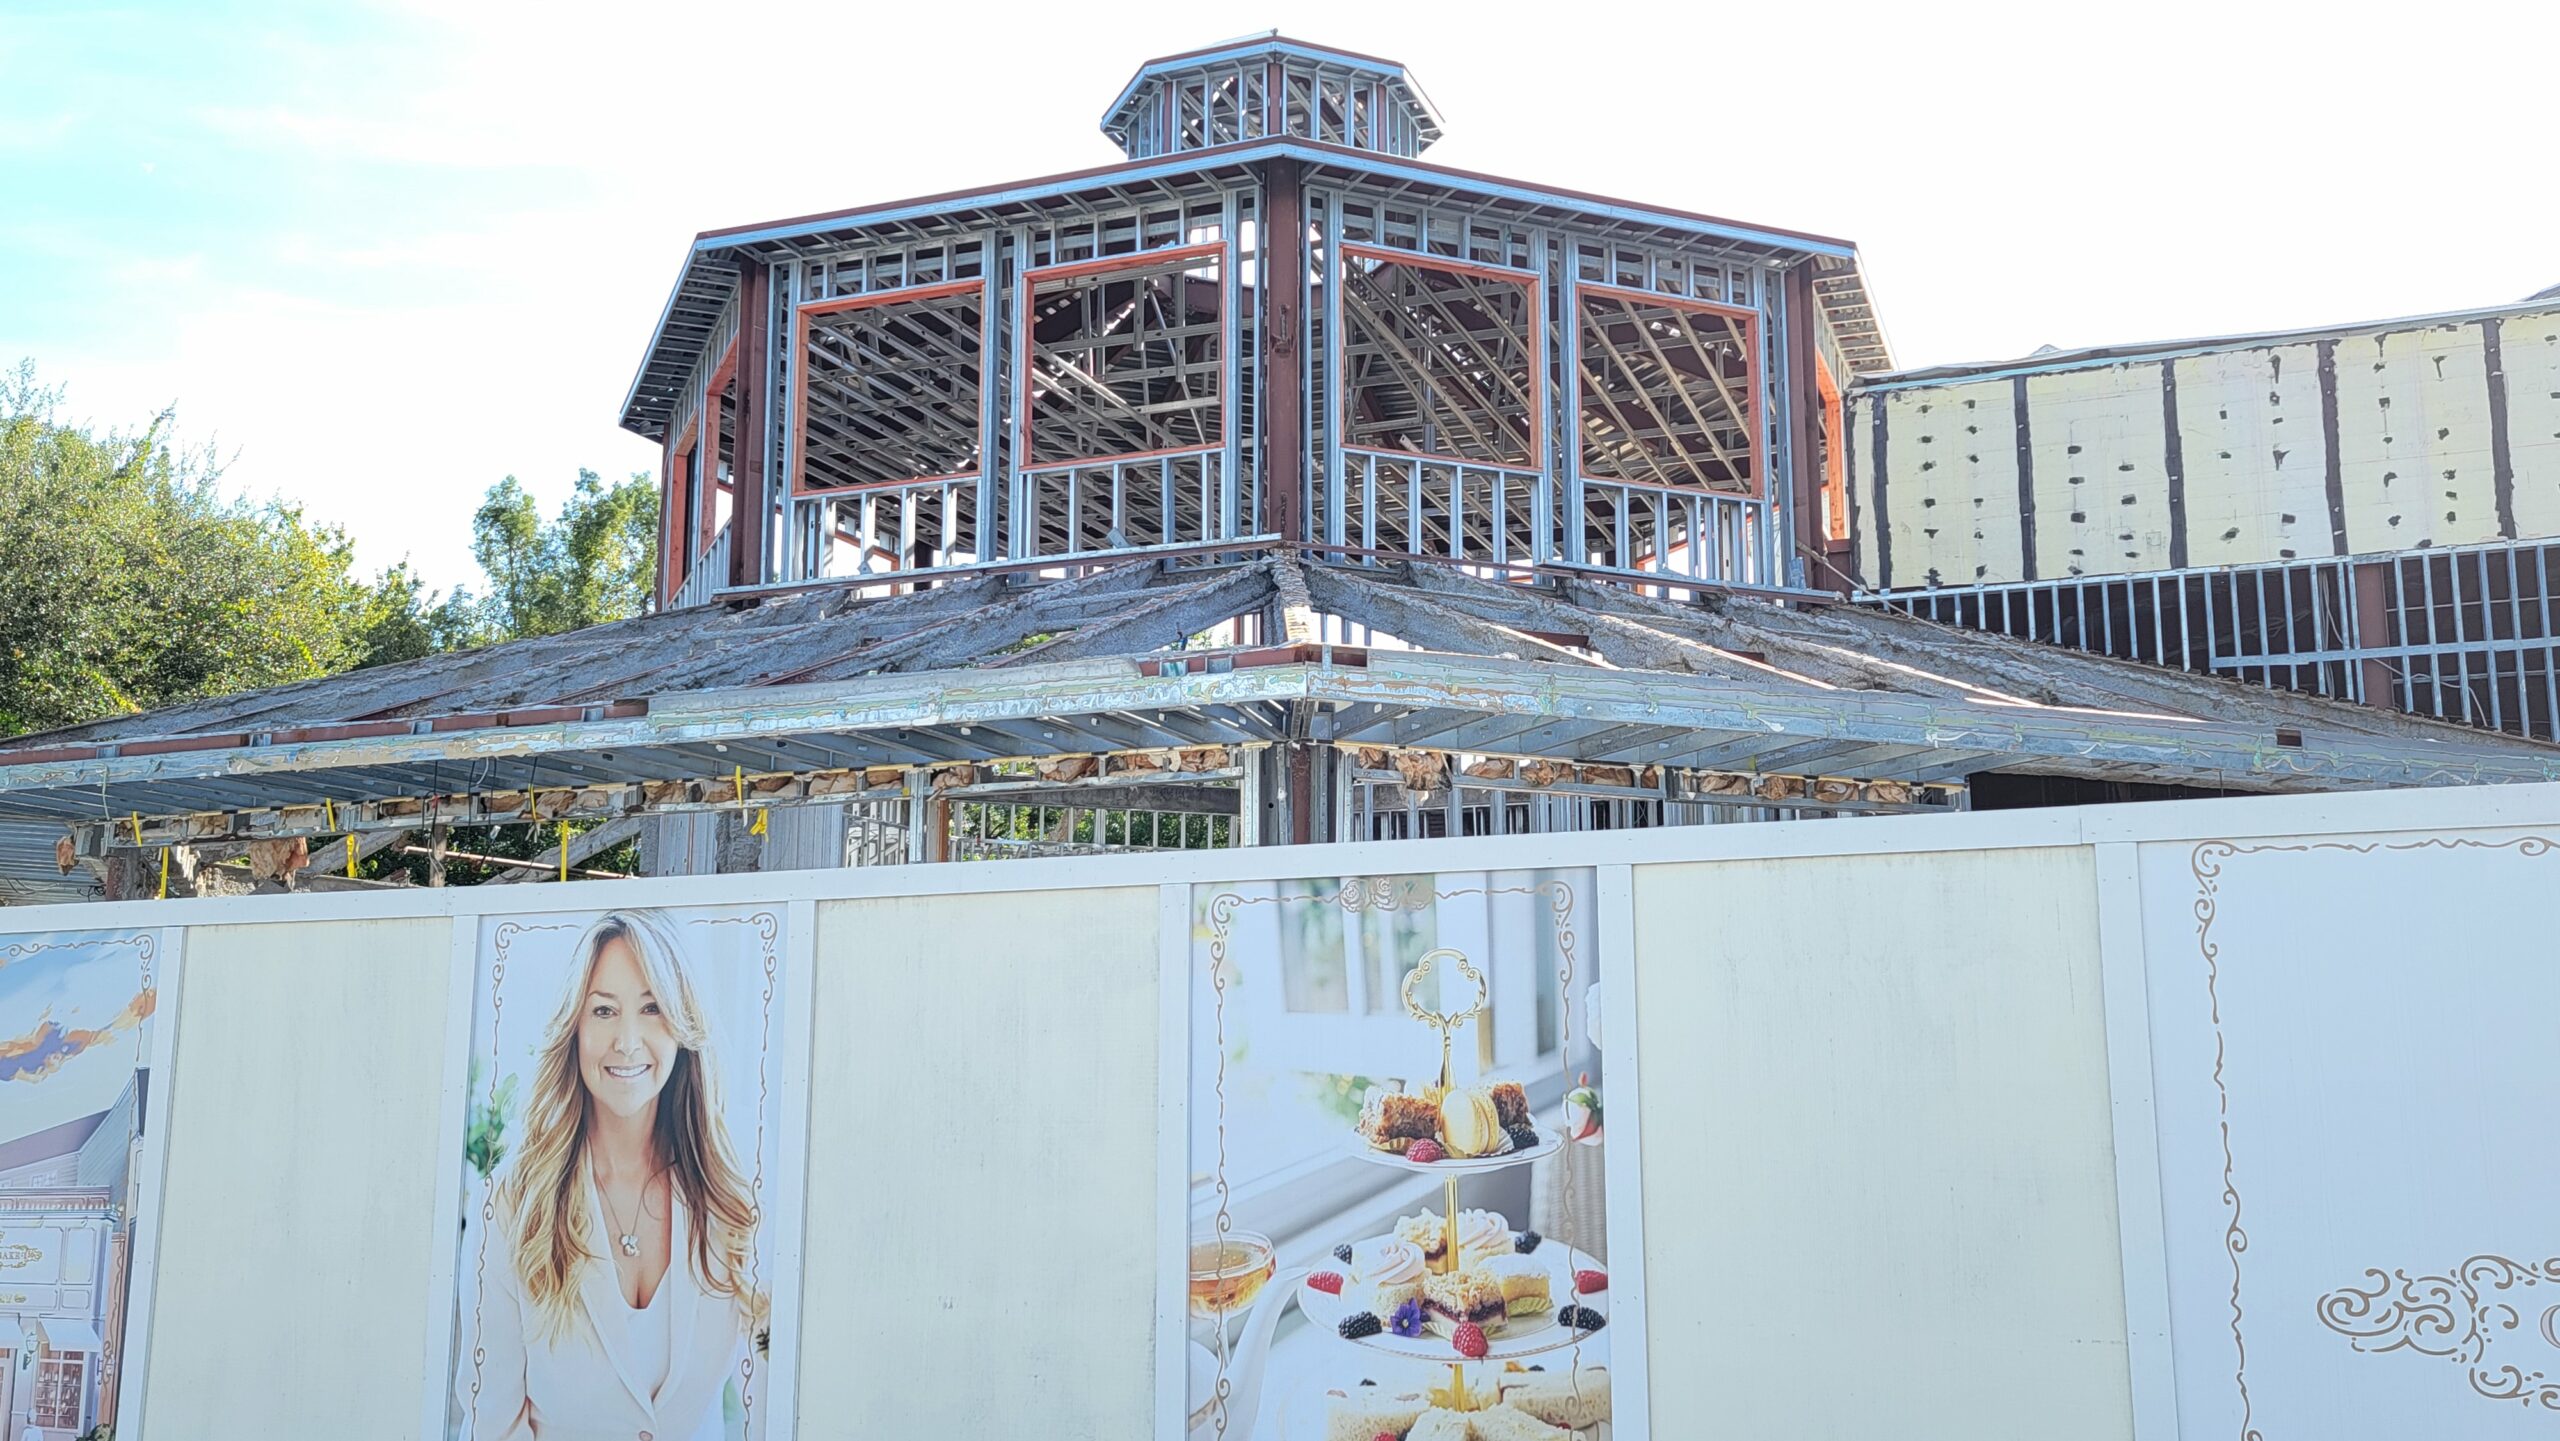 MAJOR UPDATE on the NEW Cake Bake Shop Coming to Disney World